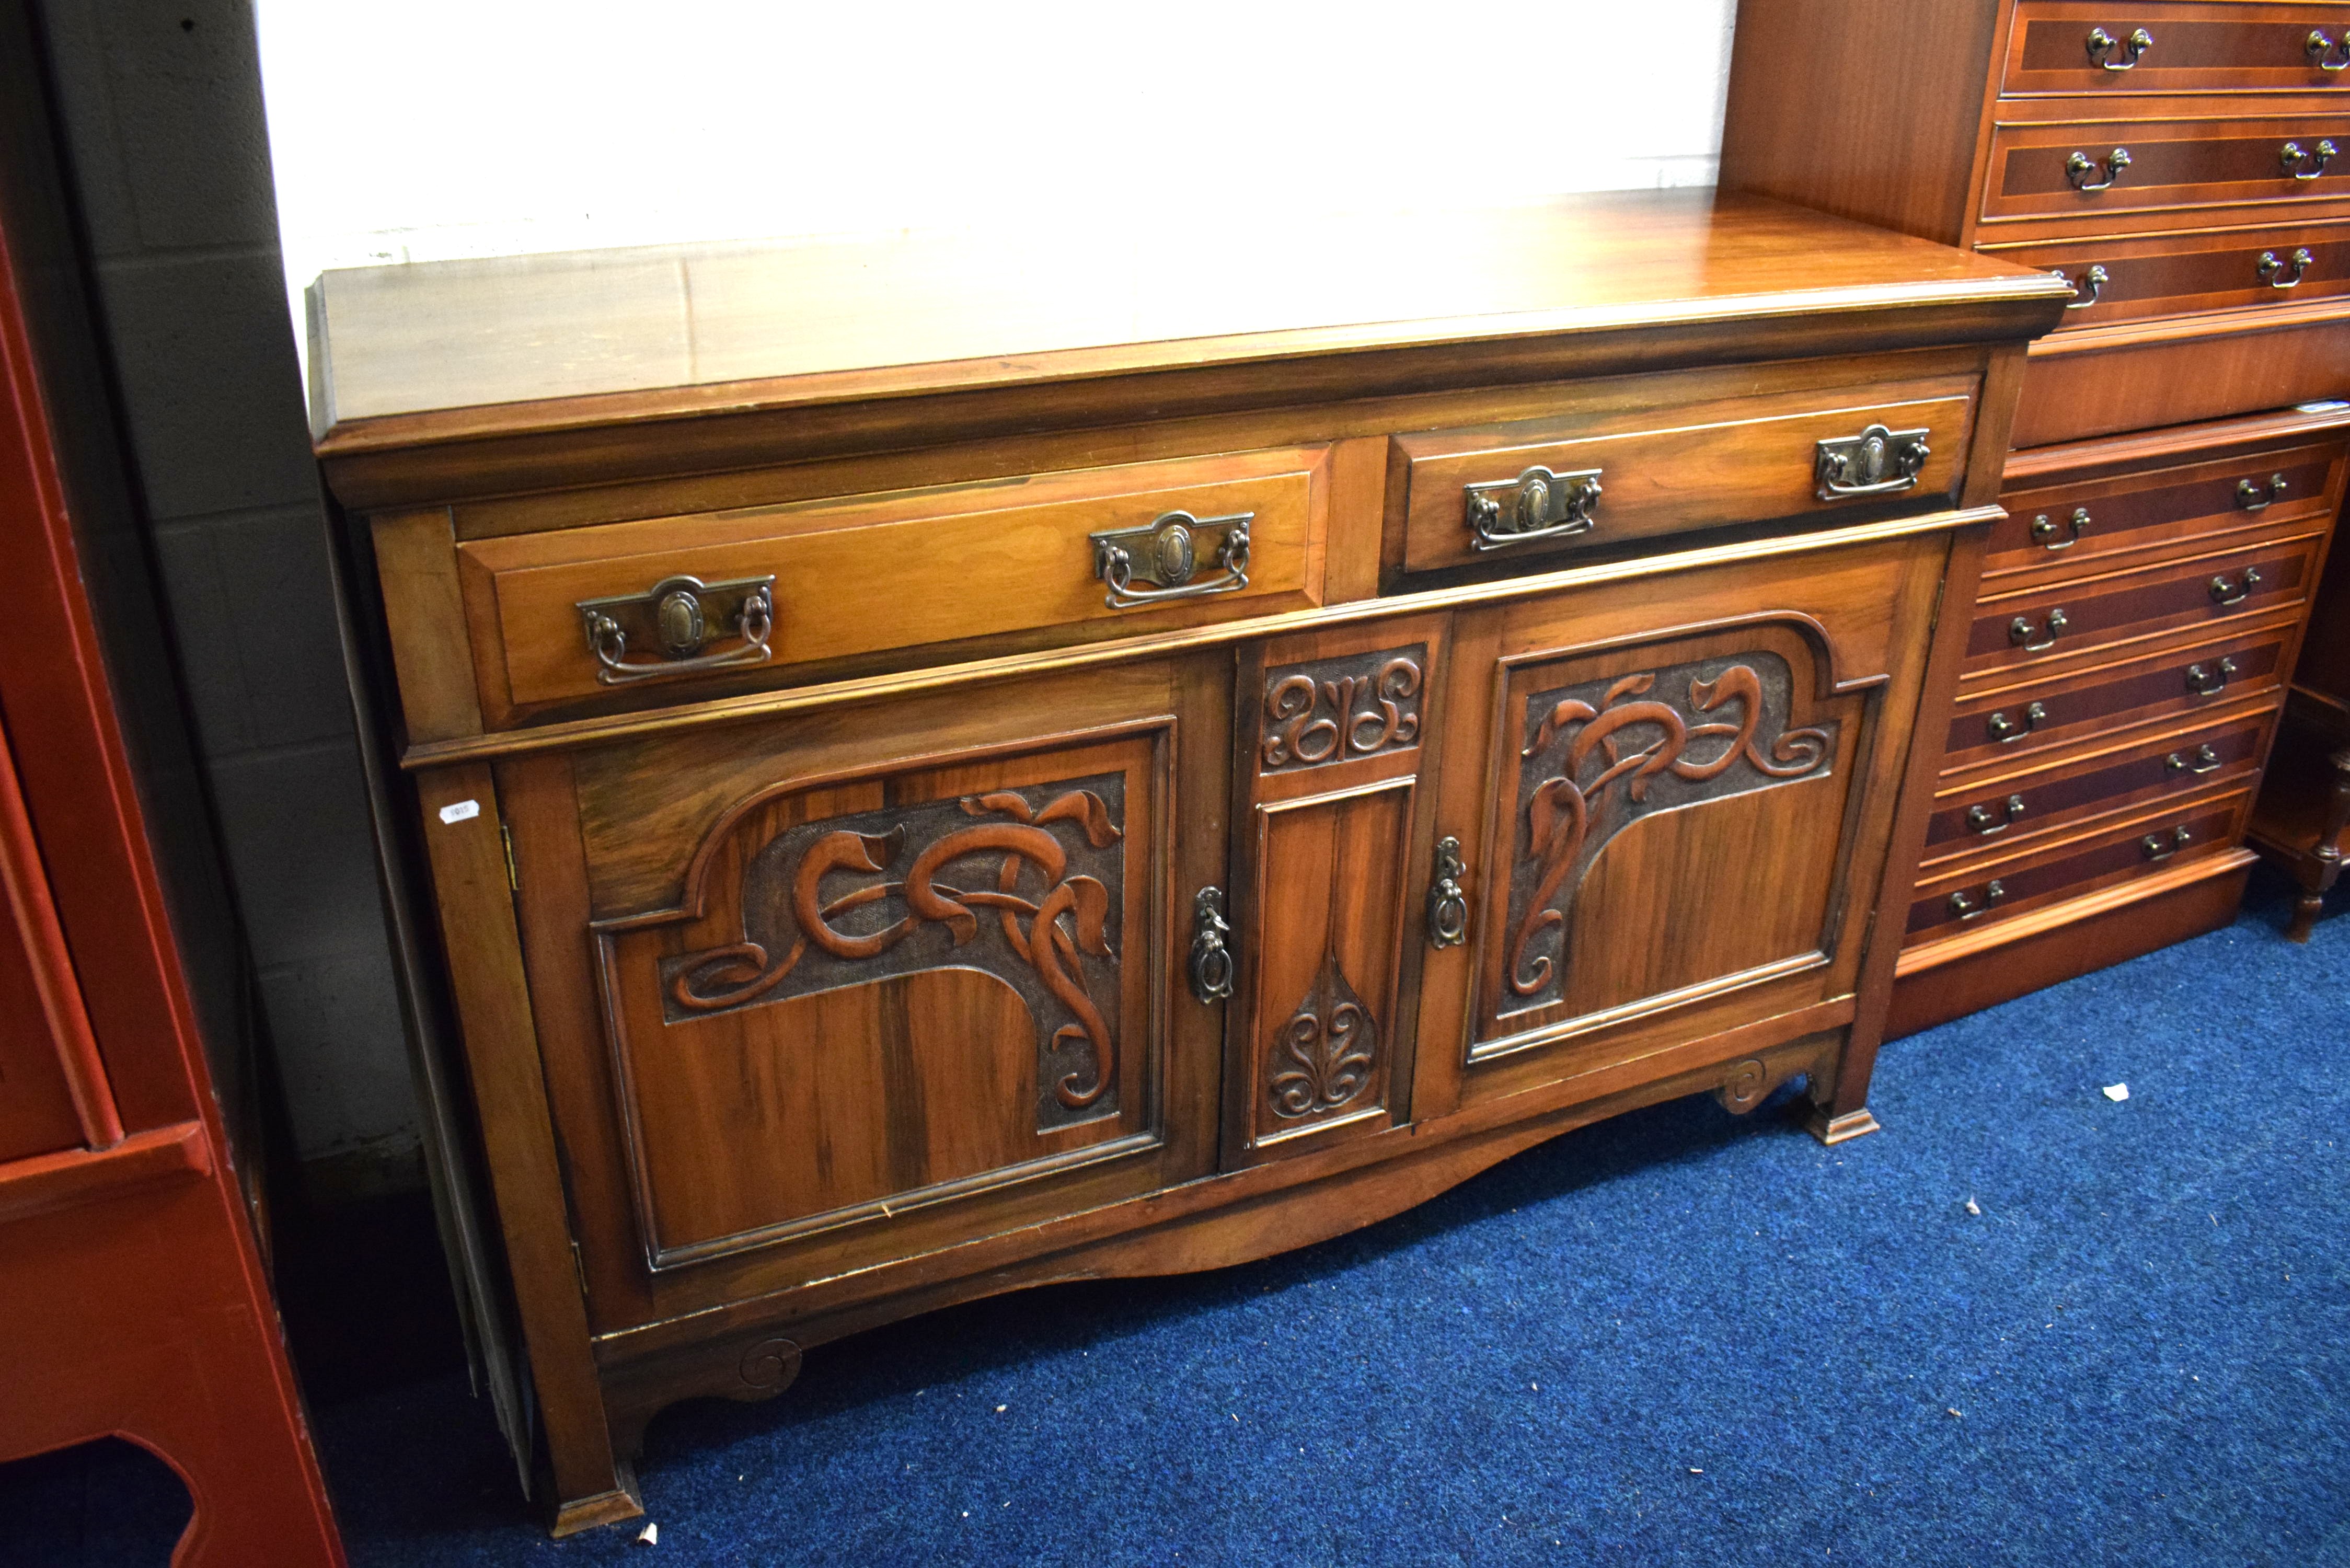 Large buffet cabinet with carving decoration to front. Two drawers above cupboards.  See photos. 